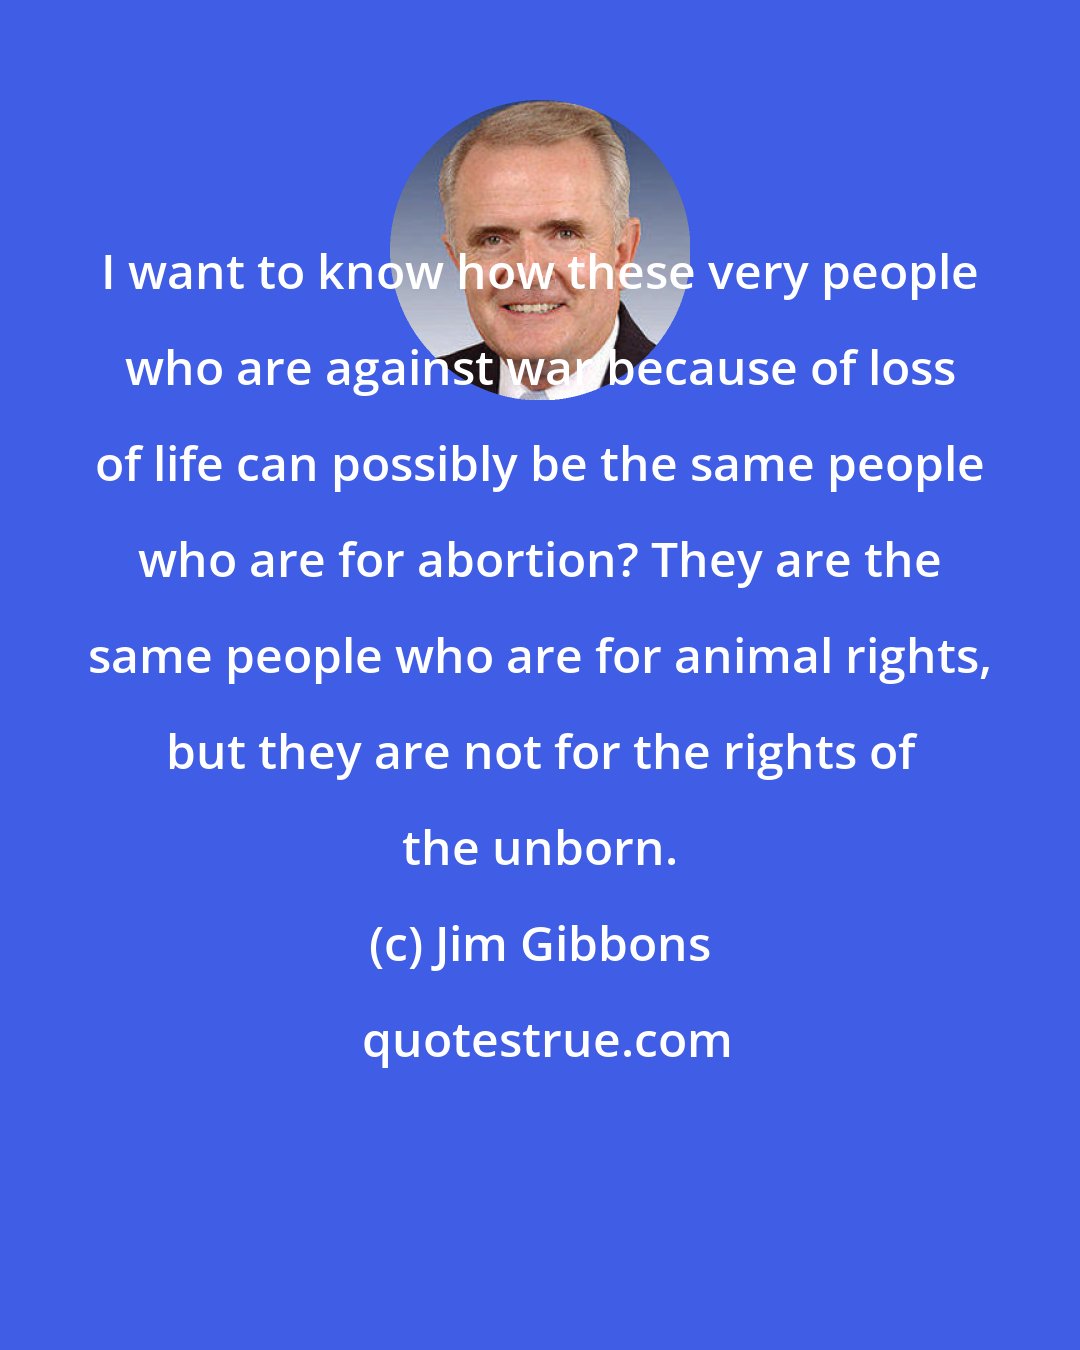 Jim Gibbons: I want to know how these very people who are against war because of loss of life can possibly be the same people who are for abortion? They are the same people who are for animal rights, but they are not for the rights of the unborn.